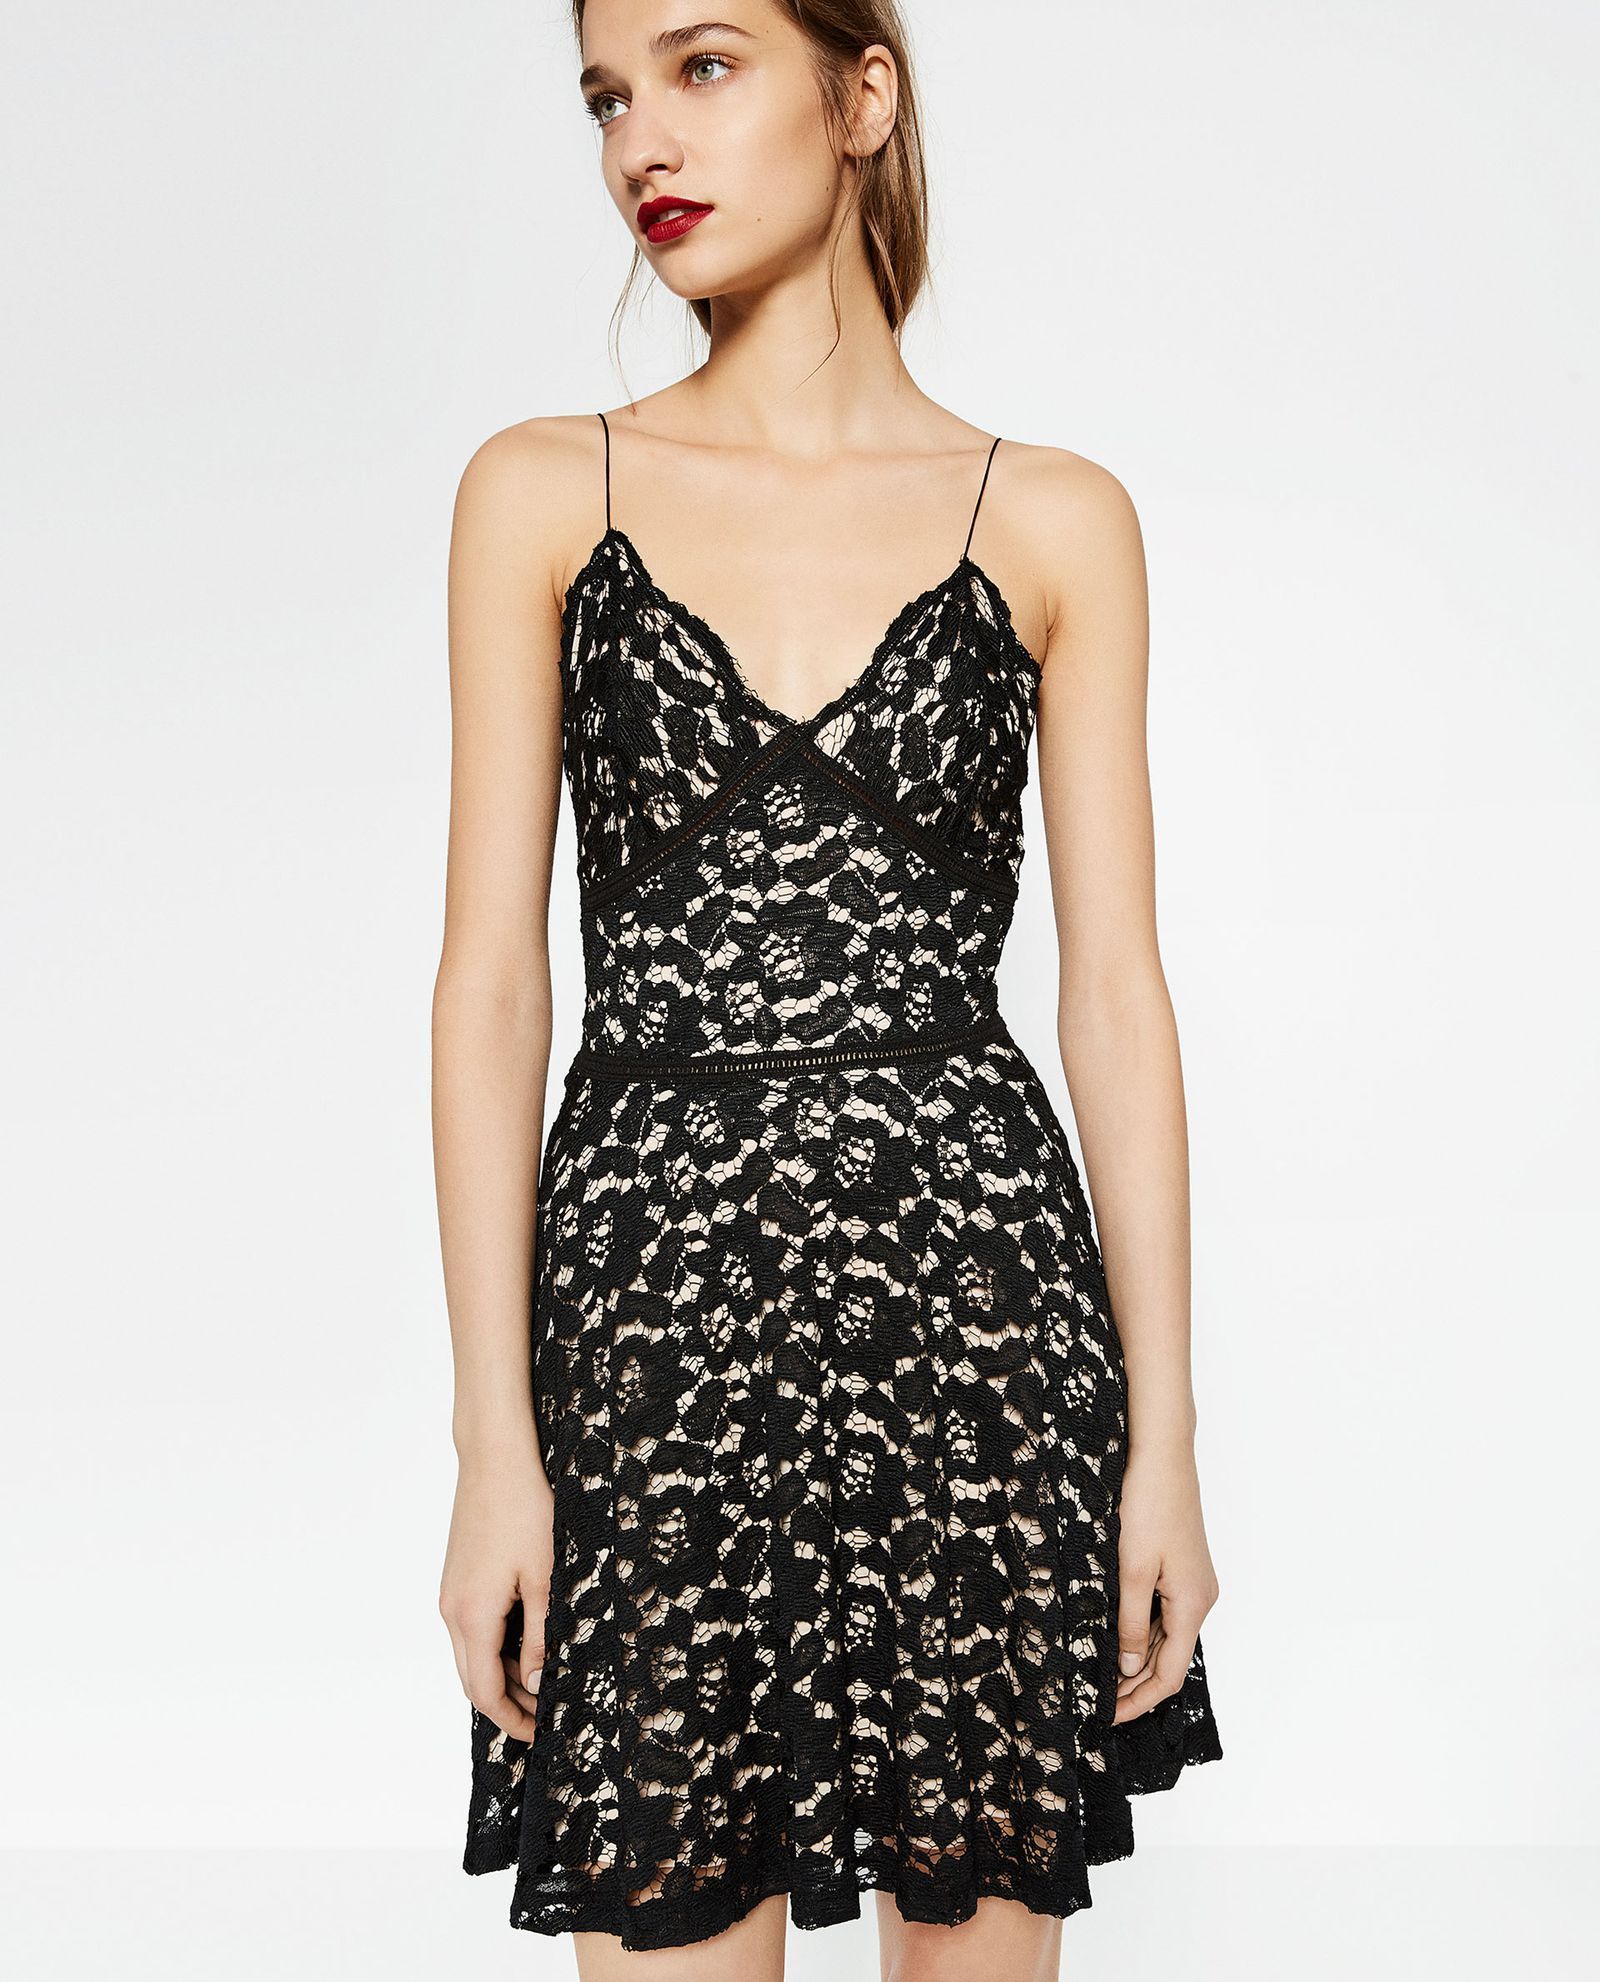 21 black dresses you absolutely CAN wear to a wedding ...